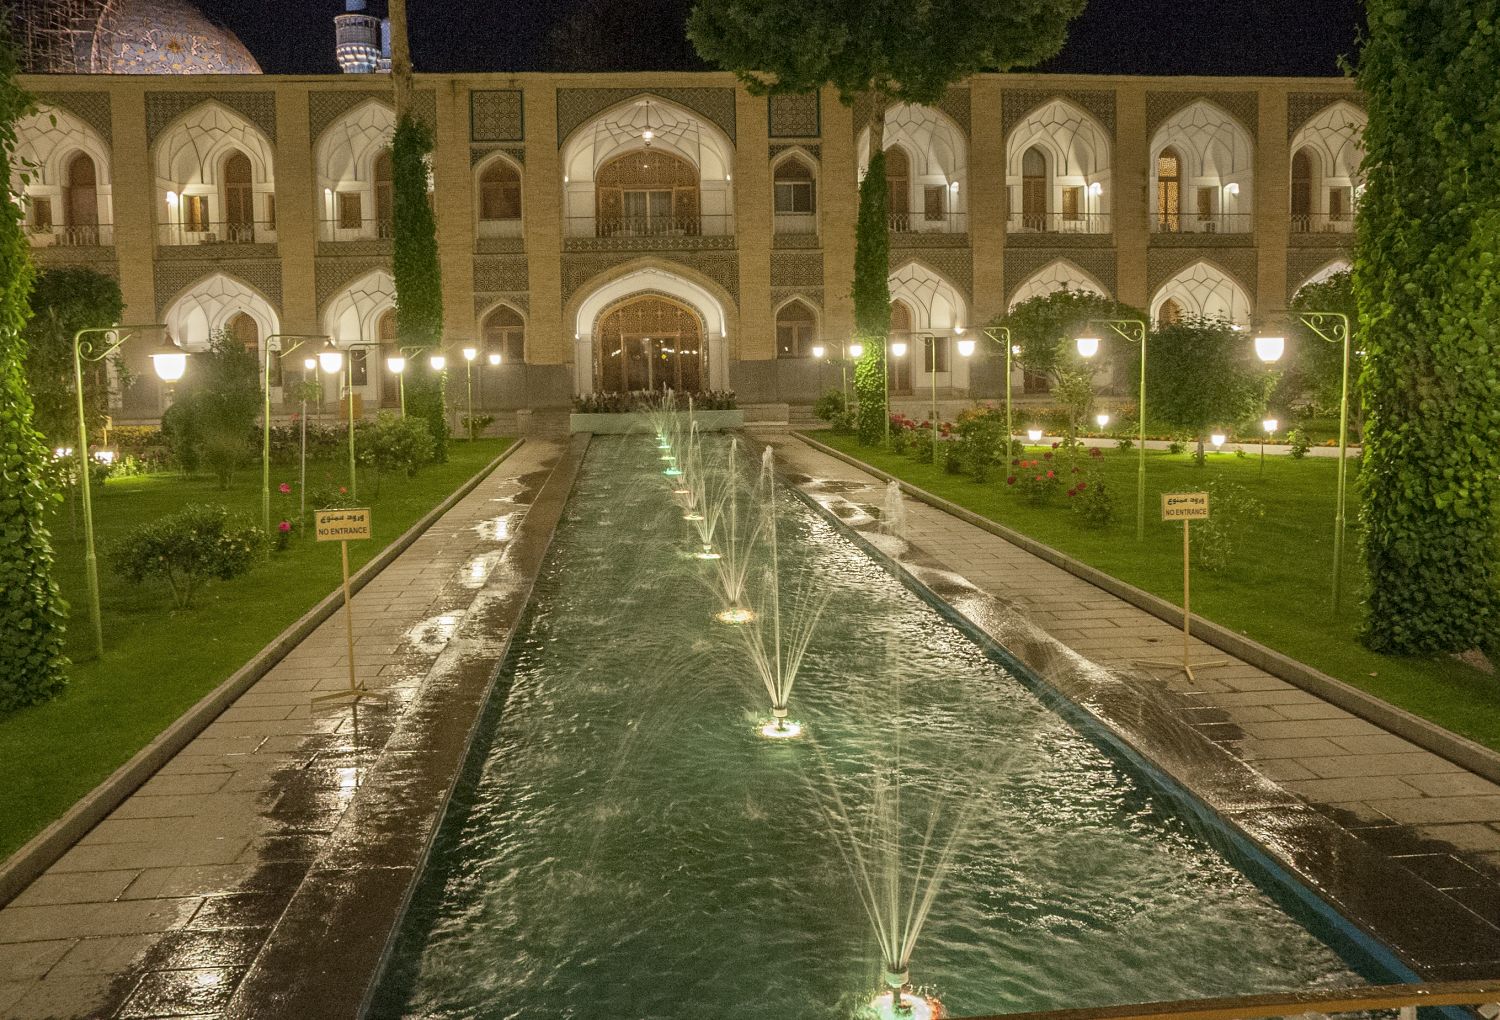 Night view of courtyard, looking south down central axis with water channel.